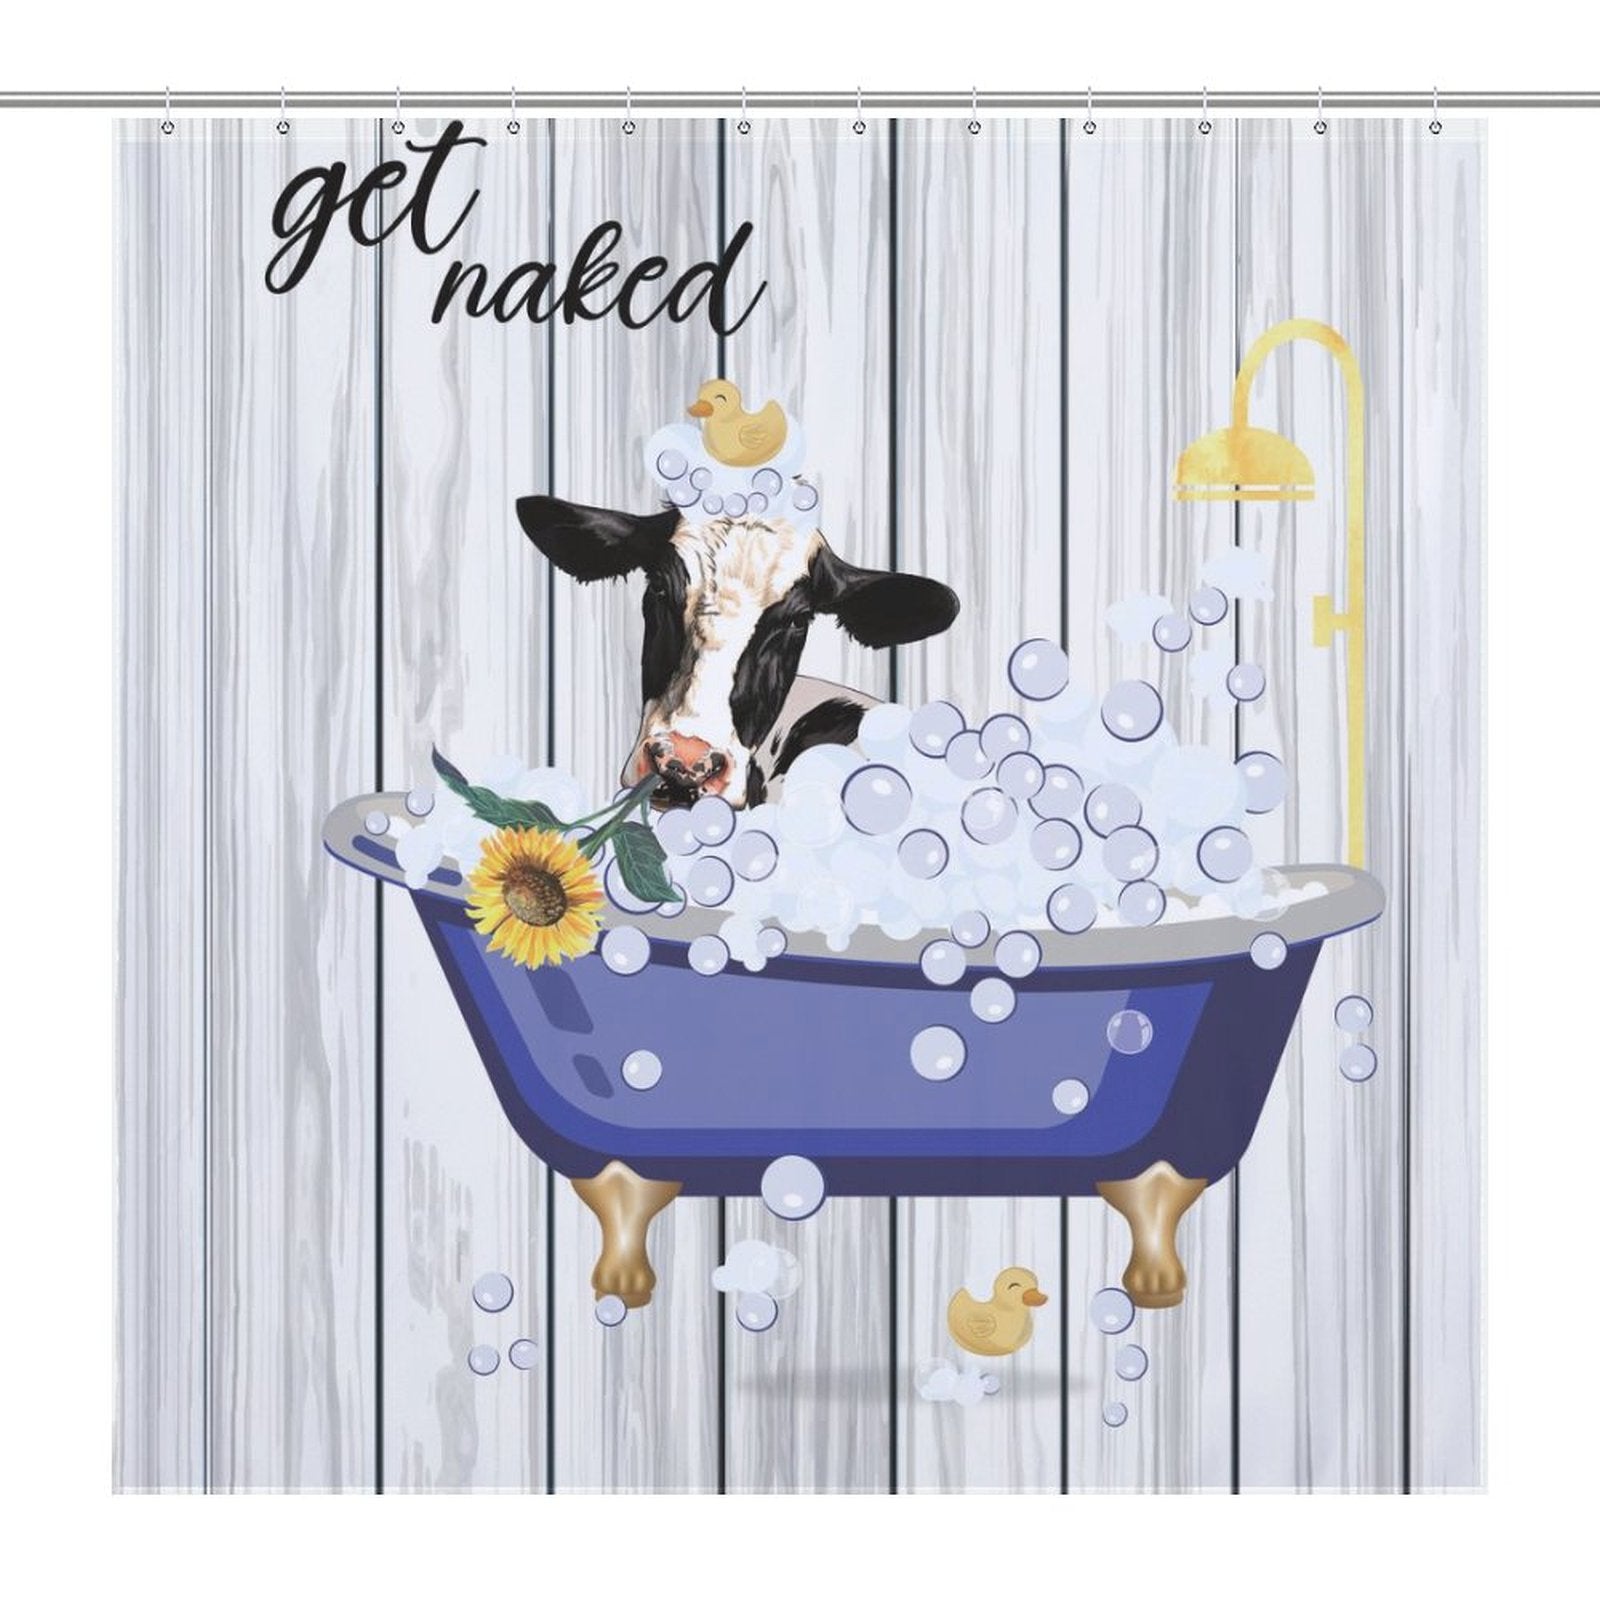 A cow in a bubble bath with rubber ducks in a purple bathtub against a wood panel background, complemented by a cheerful Funny Cow Sunflowers Get Naked Shower Curtain-Cottoncat by Cotton Cat and the words "get naked" above.